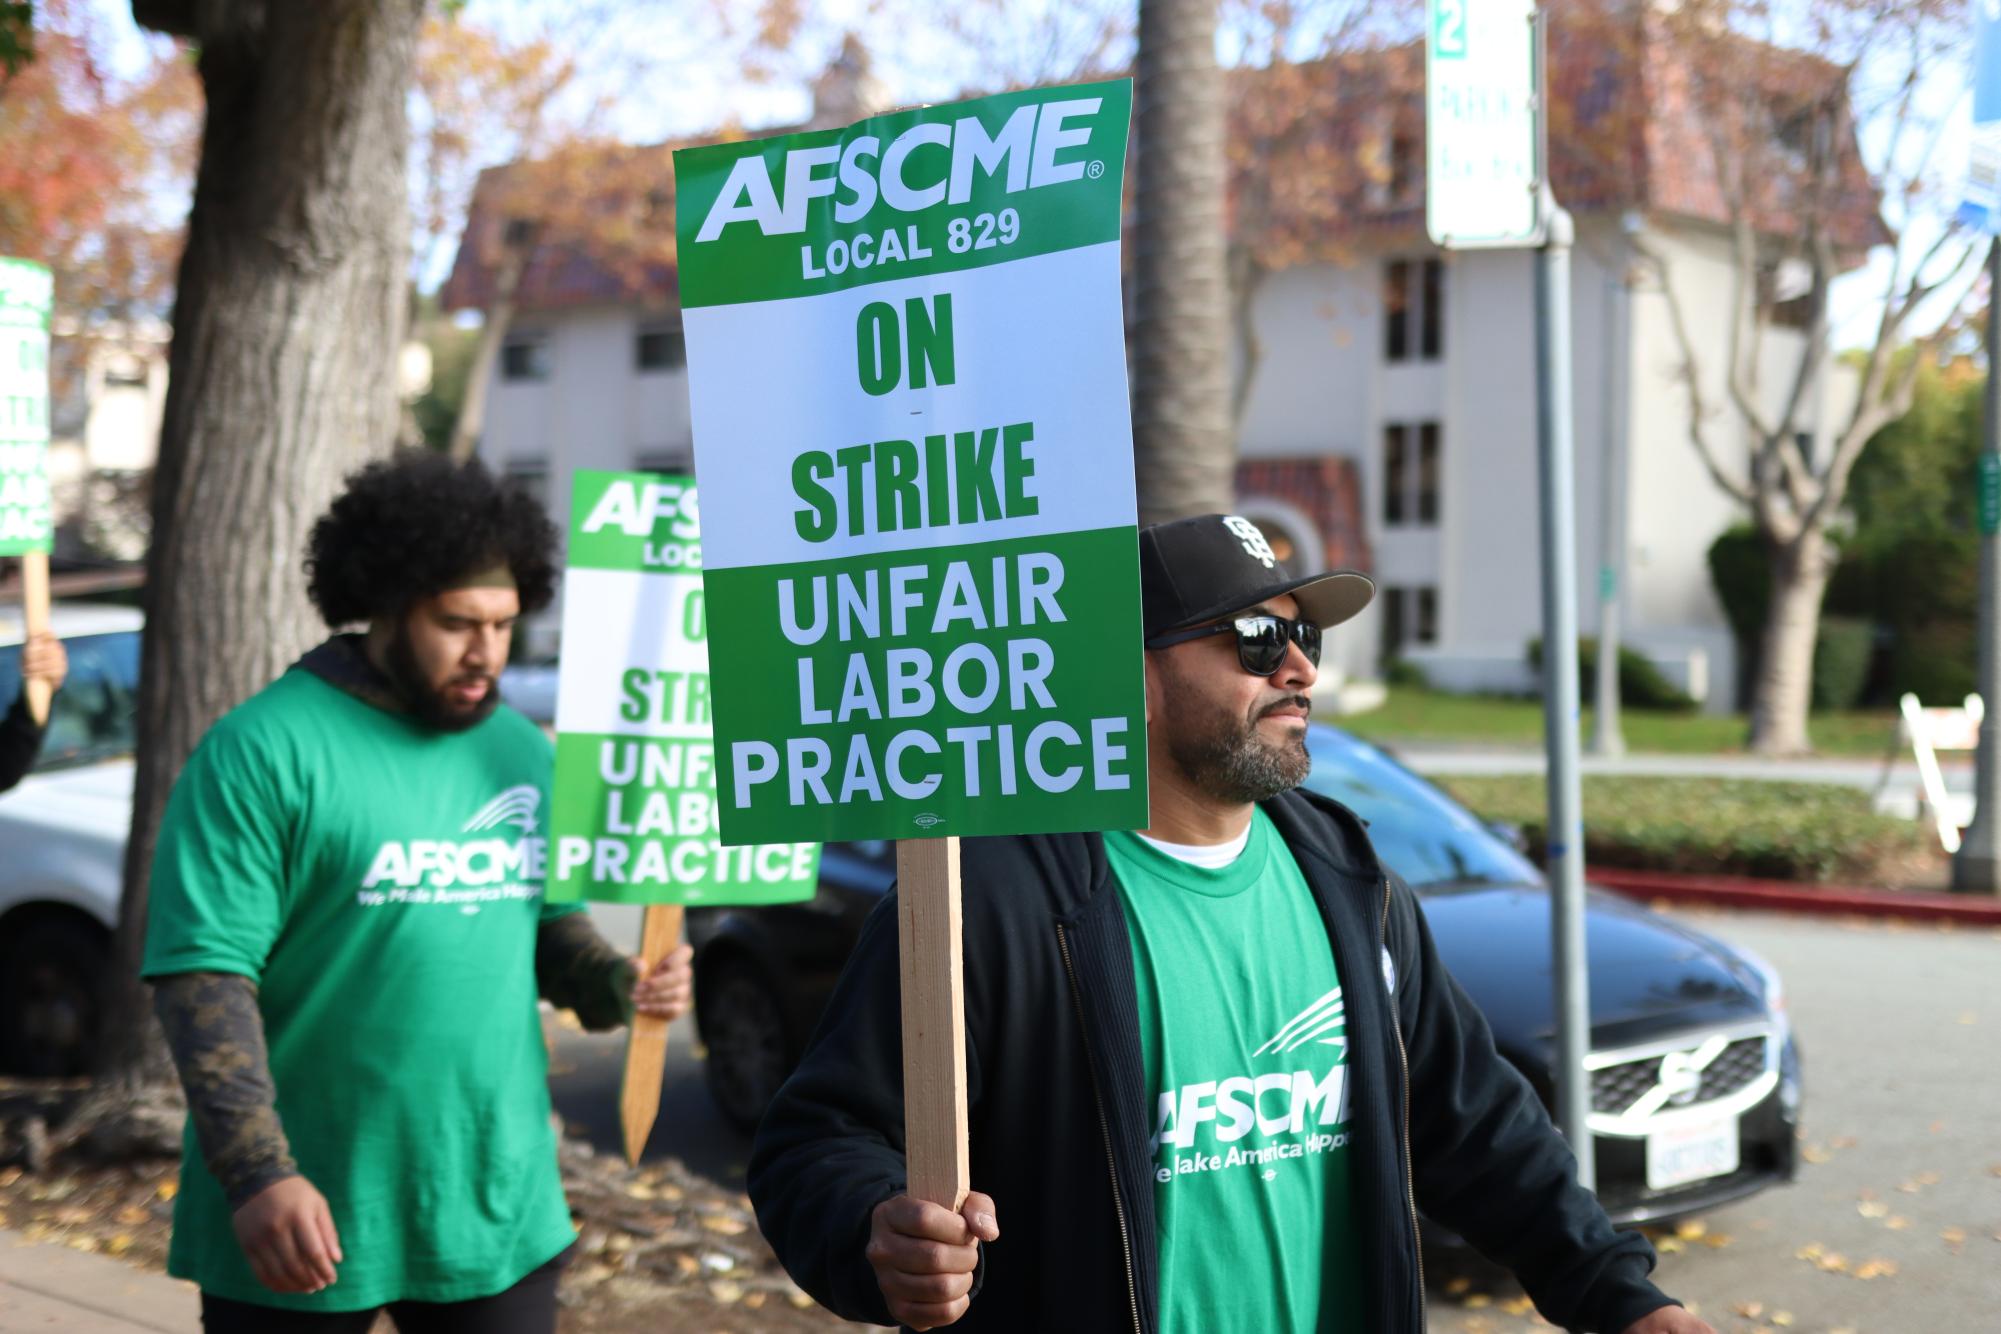 AFSCME members carried picketing signs.